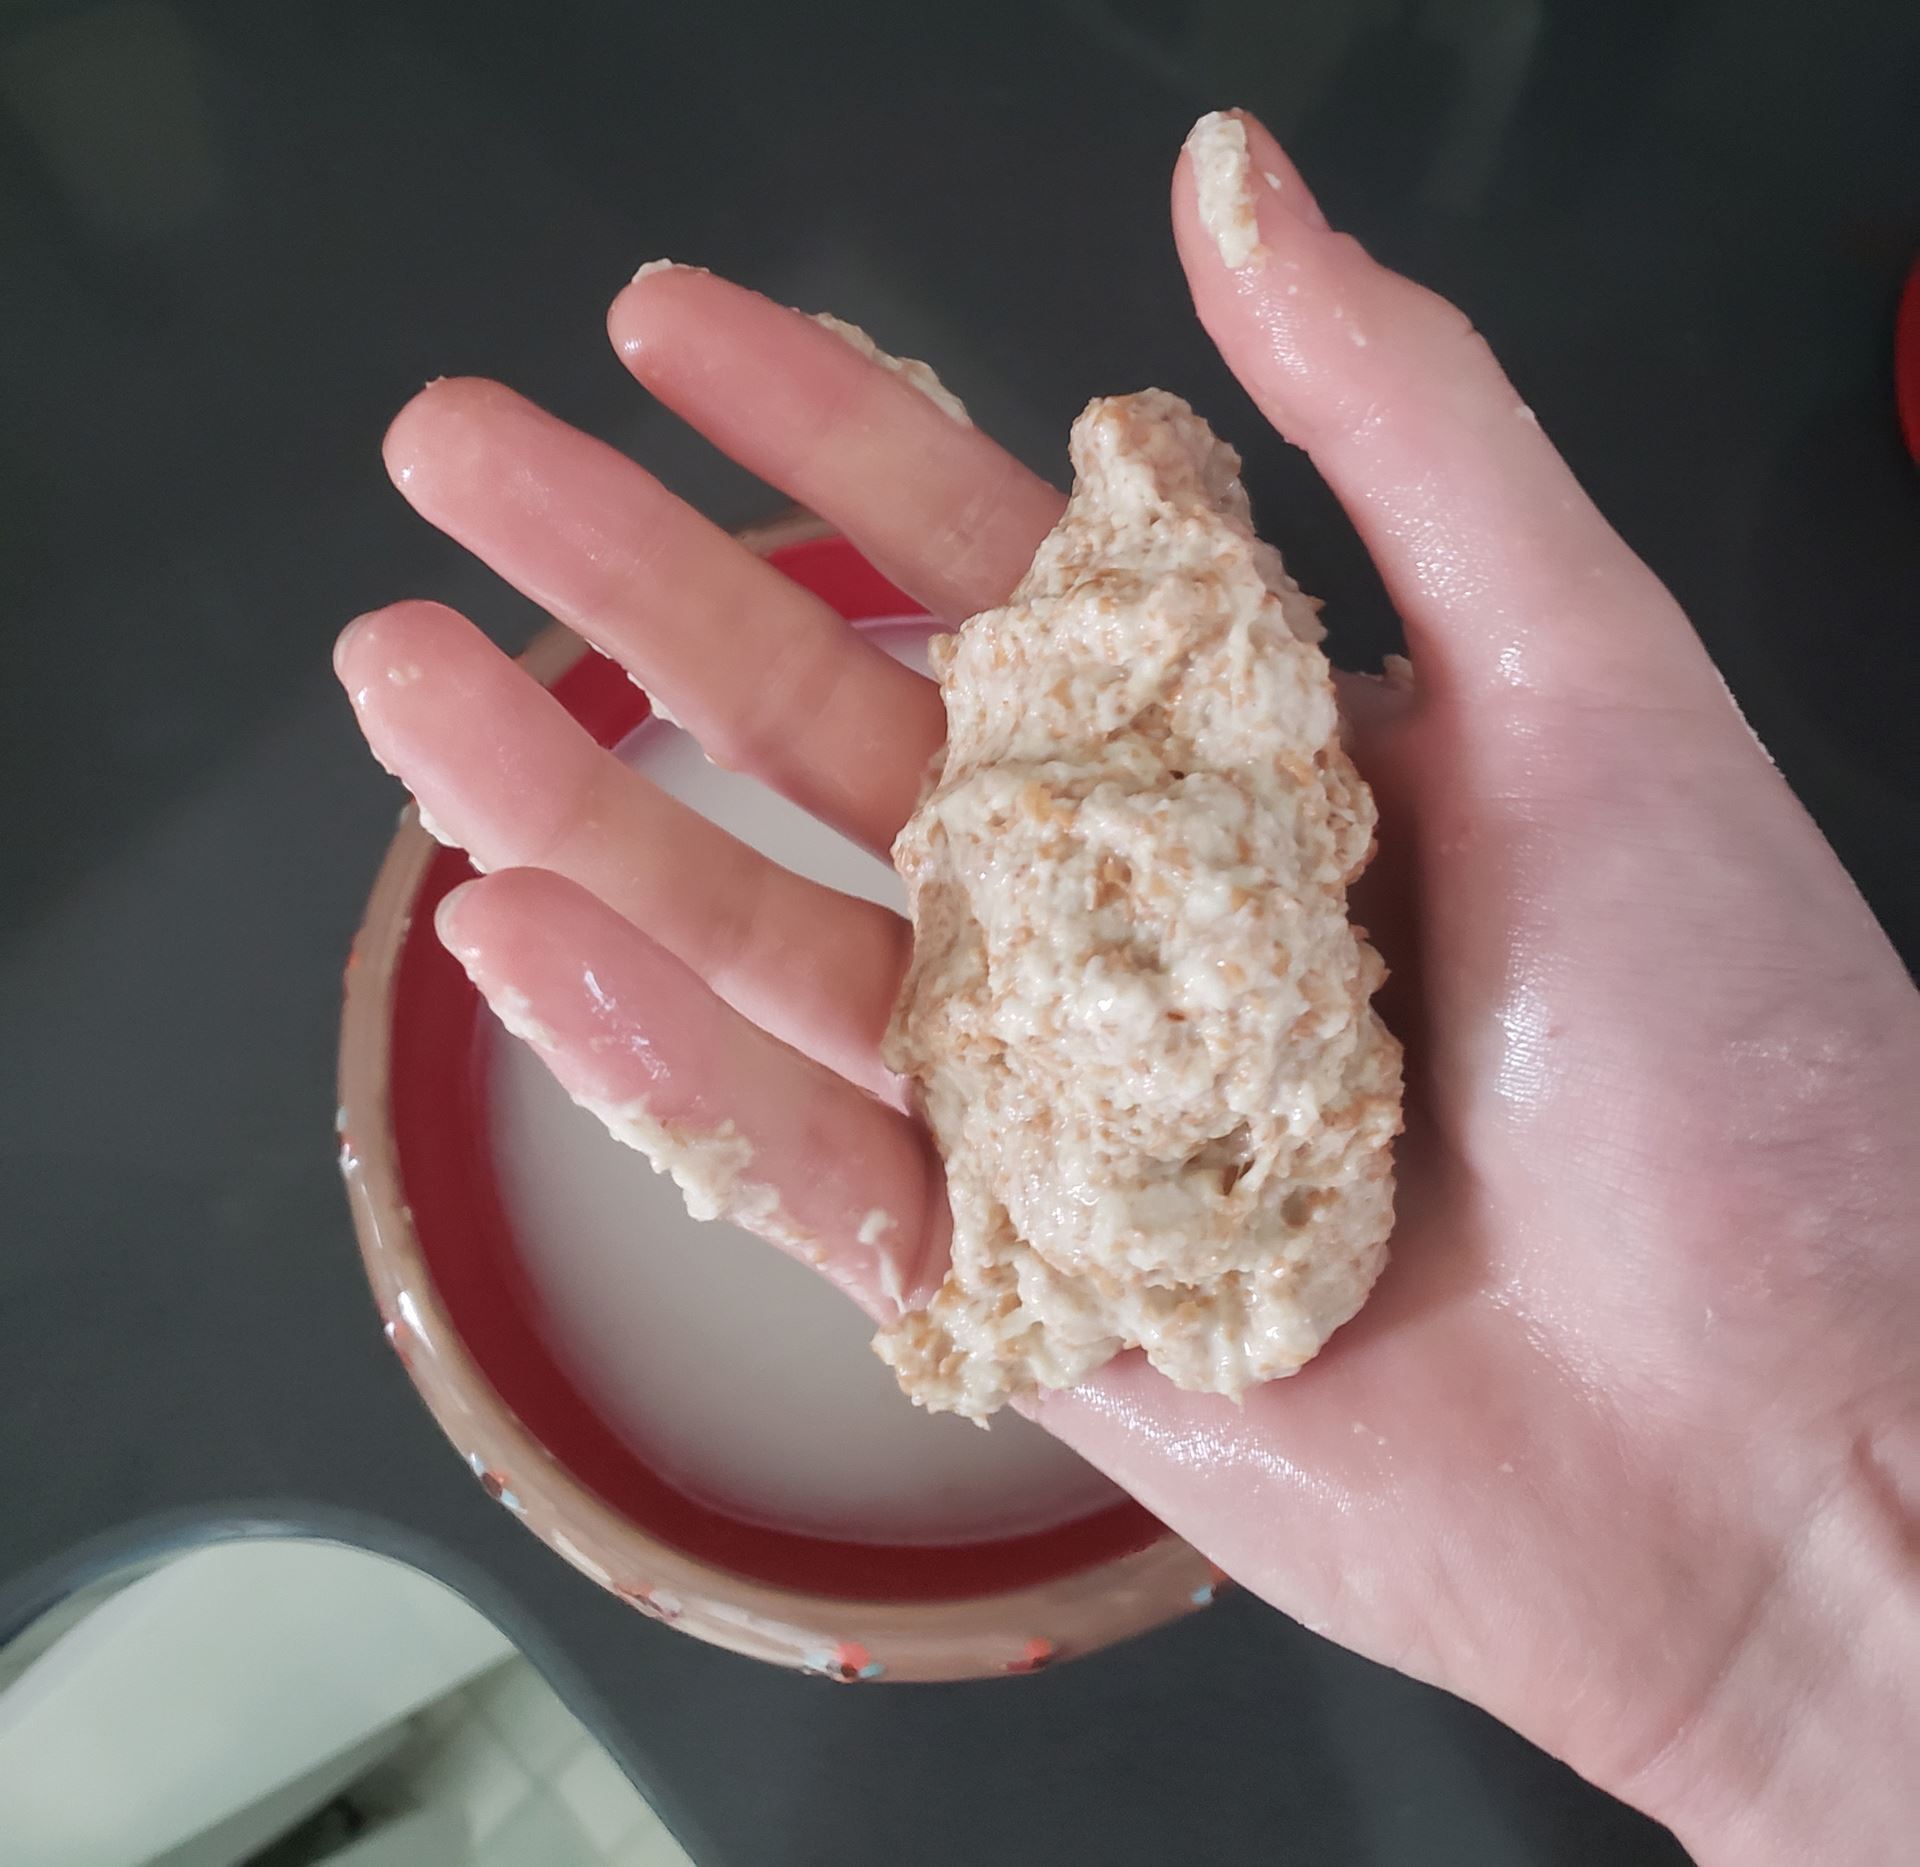 Photo of a hand holding a lump of gluten from flour. The hand is hovering over a bowl with water where the lump of gluten was extracted from.